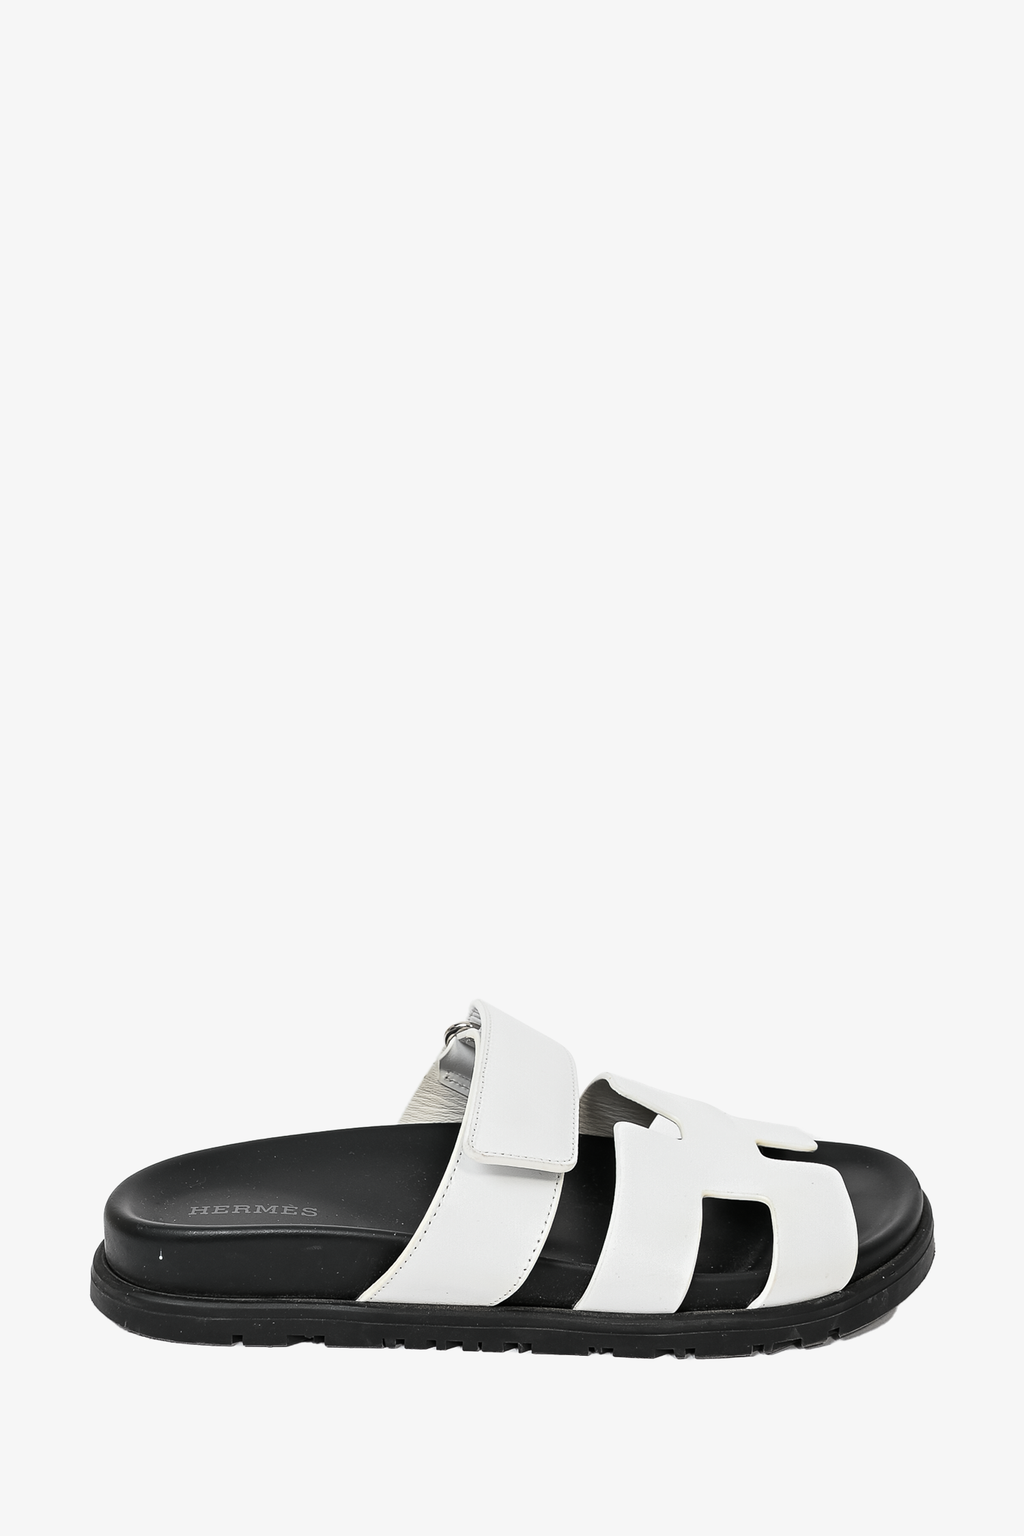 Hermes White/Black Leather Chypre Sandals Size 35 – Mine & Yours